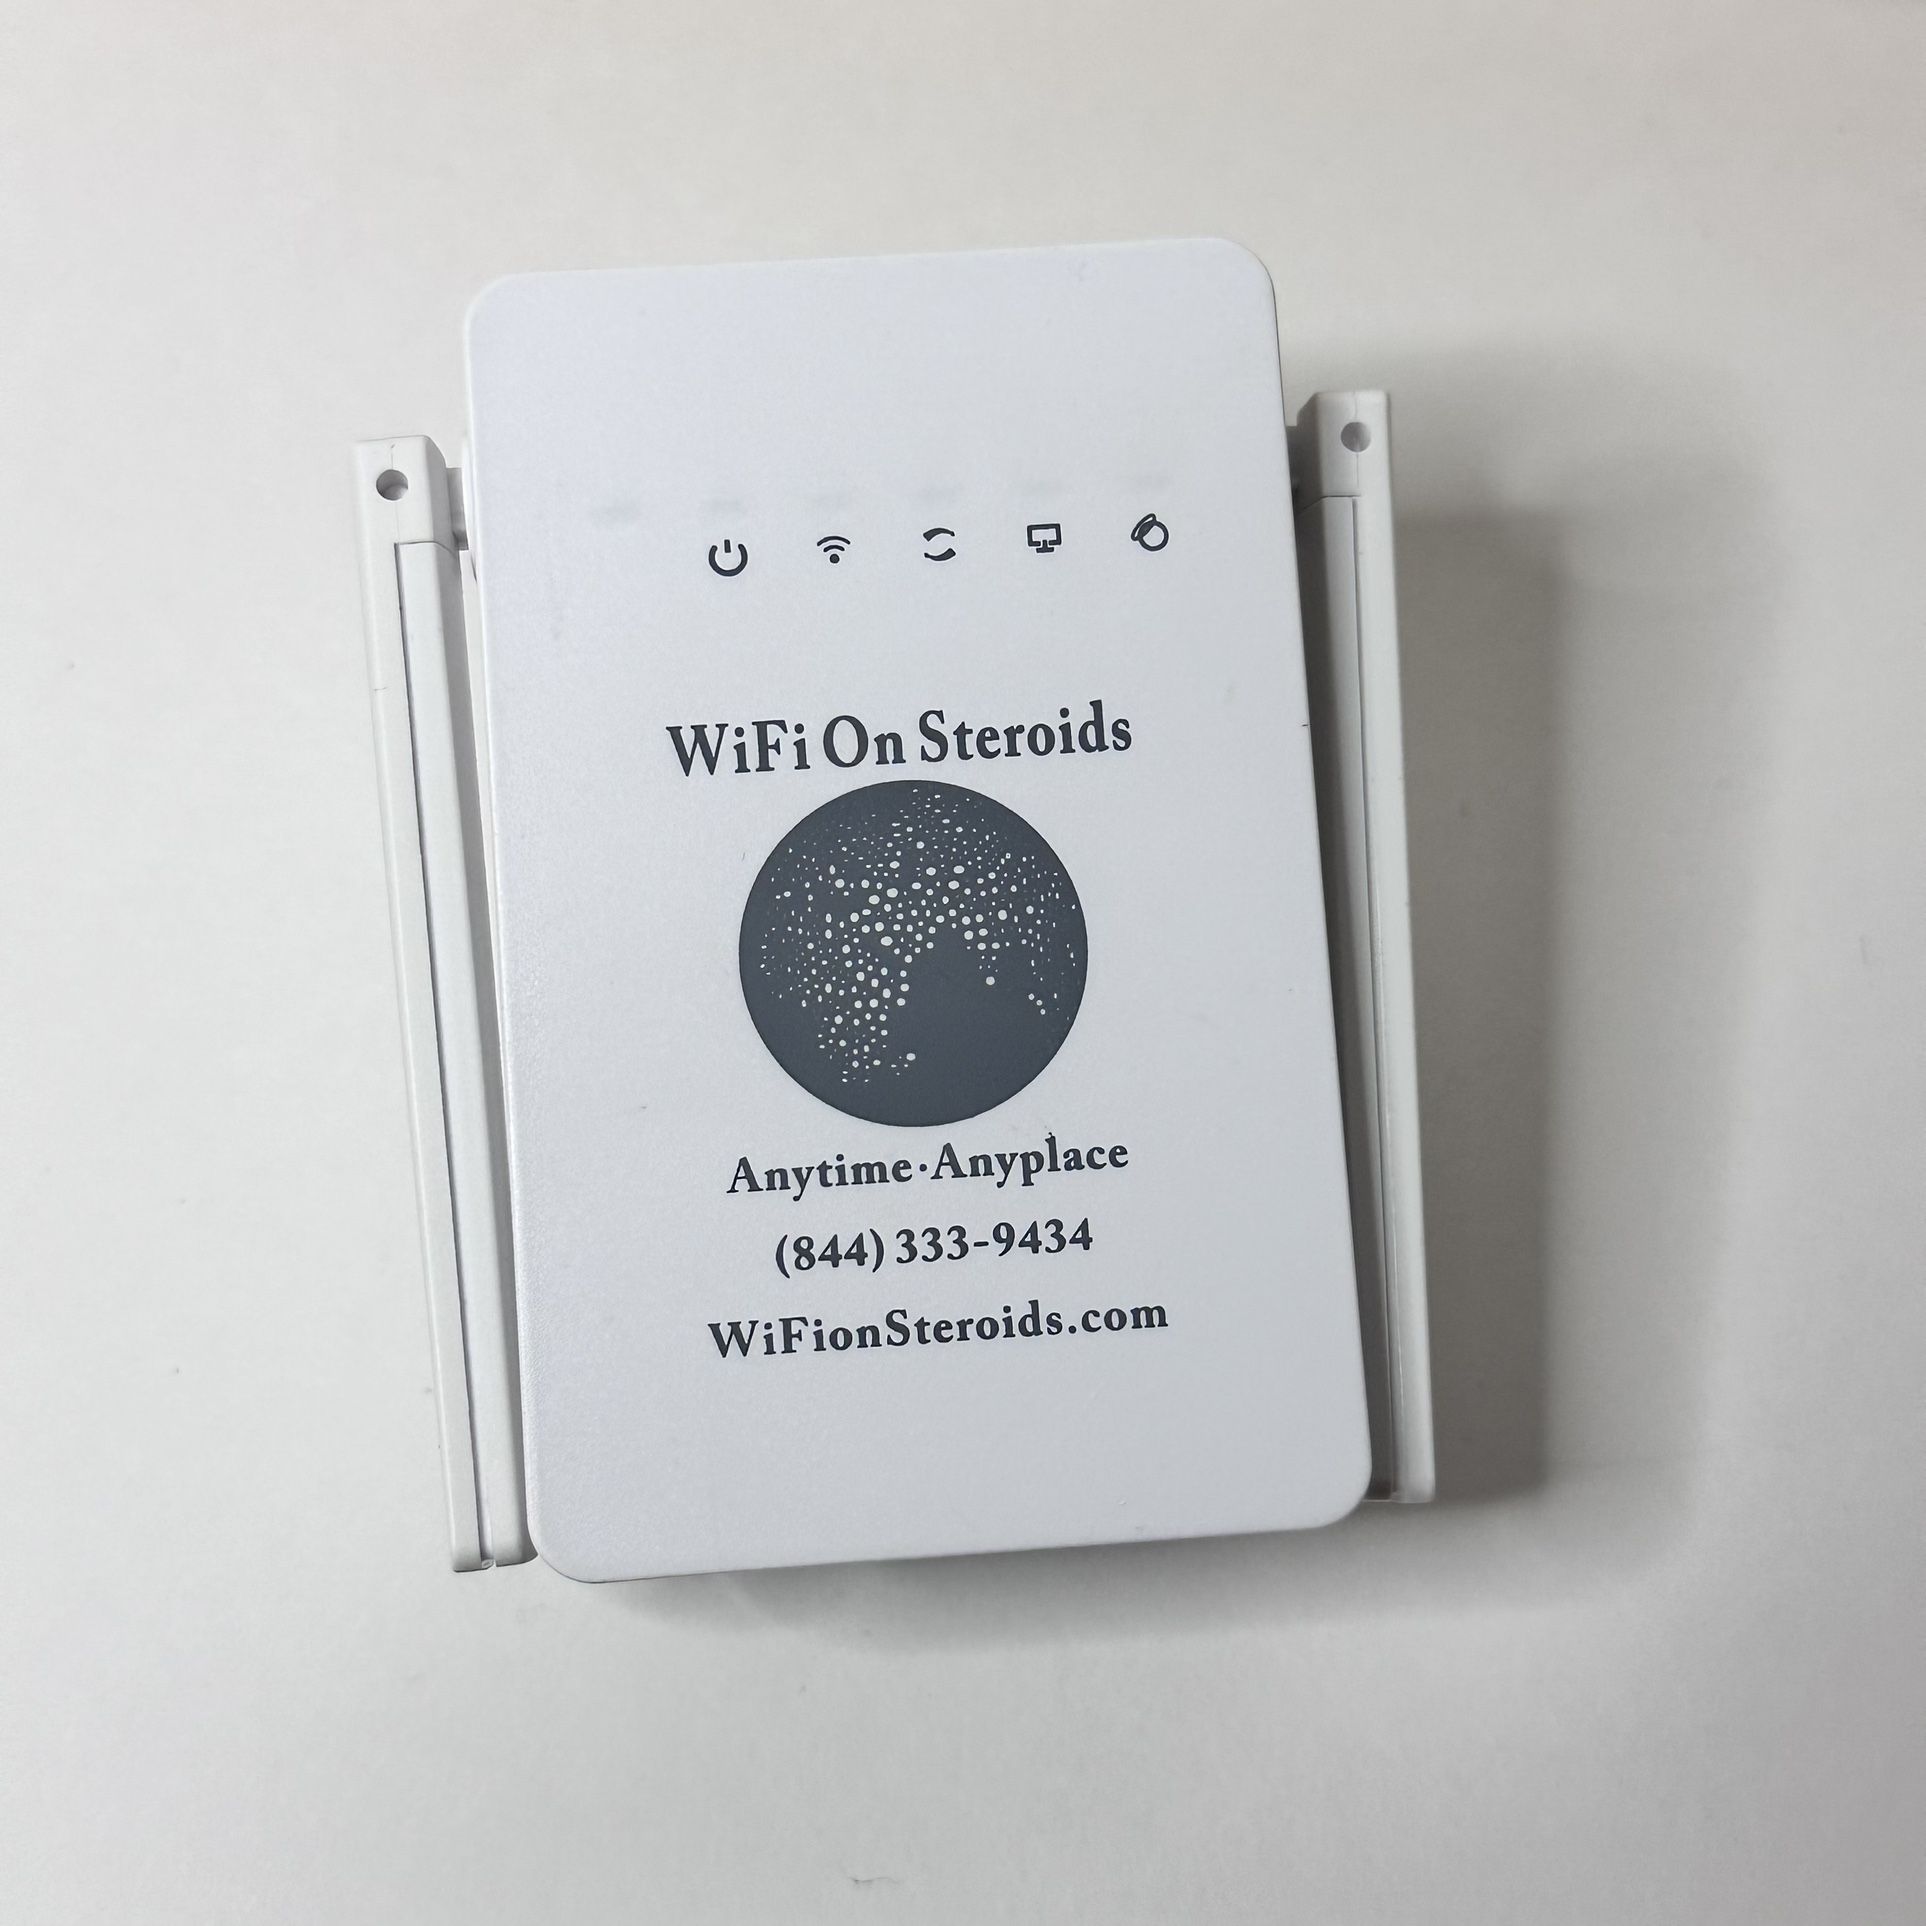 WiFiOnSteroids wifi signal extender / wireless mini router